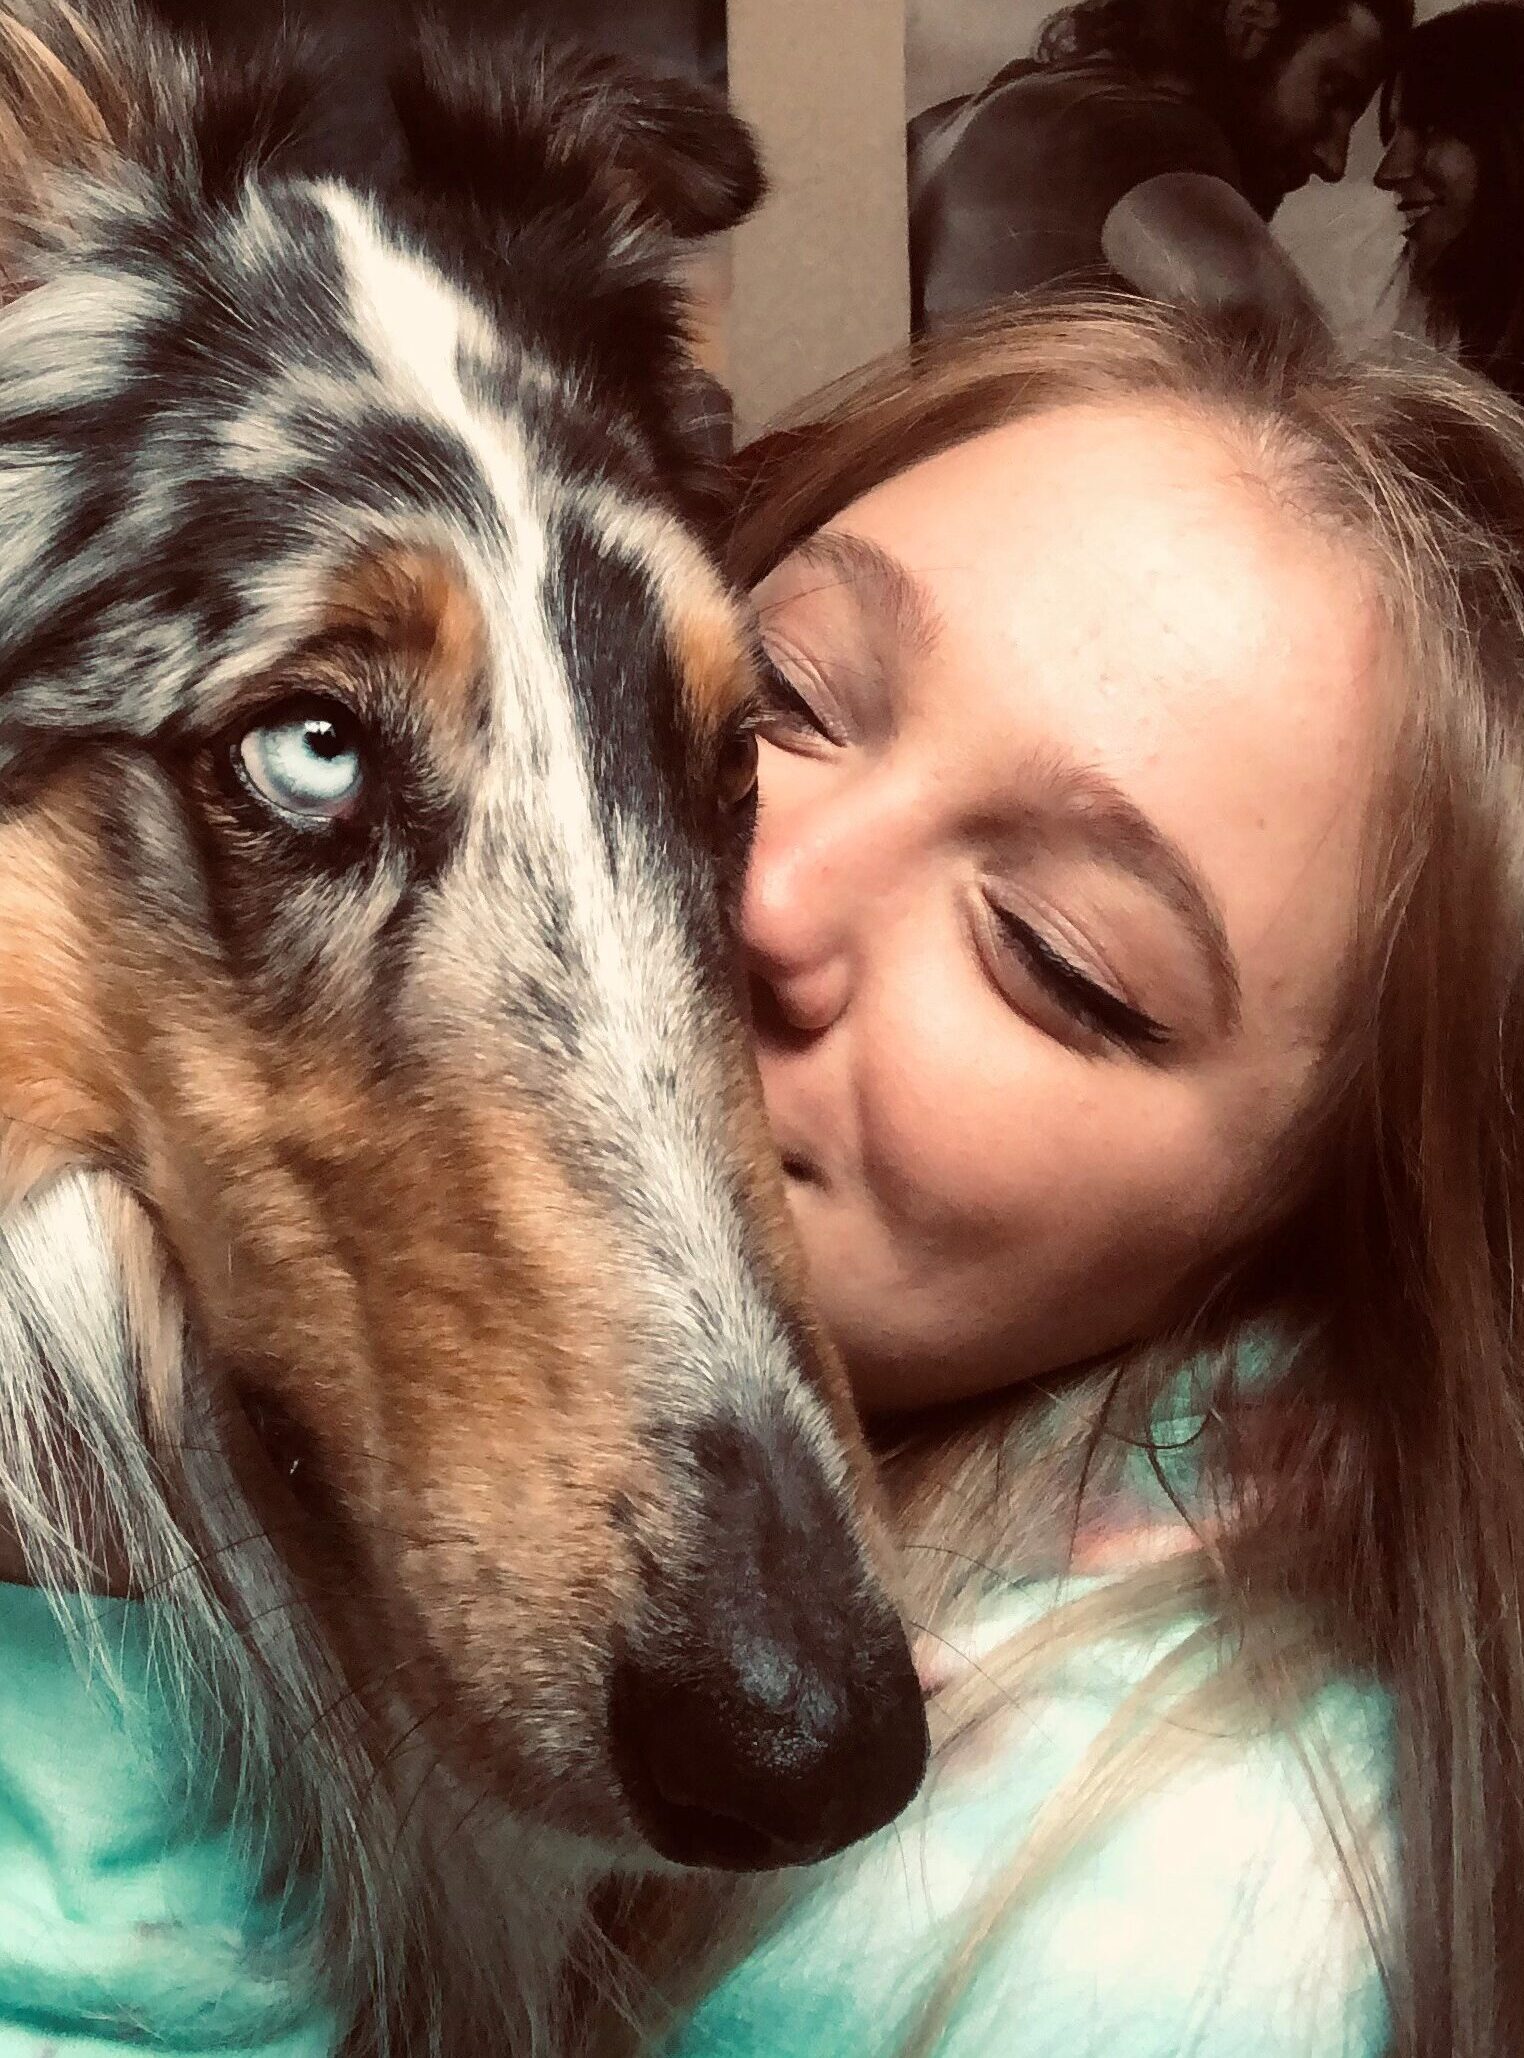 I’m Jacklyn, this is my dog Percy! Animals have been near and dear to my heart since I could pet them! I’m studying to become an Animal Acupressure therapist because healing animals with natural energy is my passion!